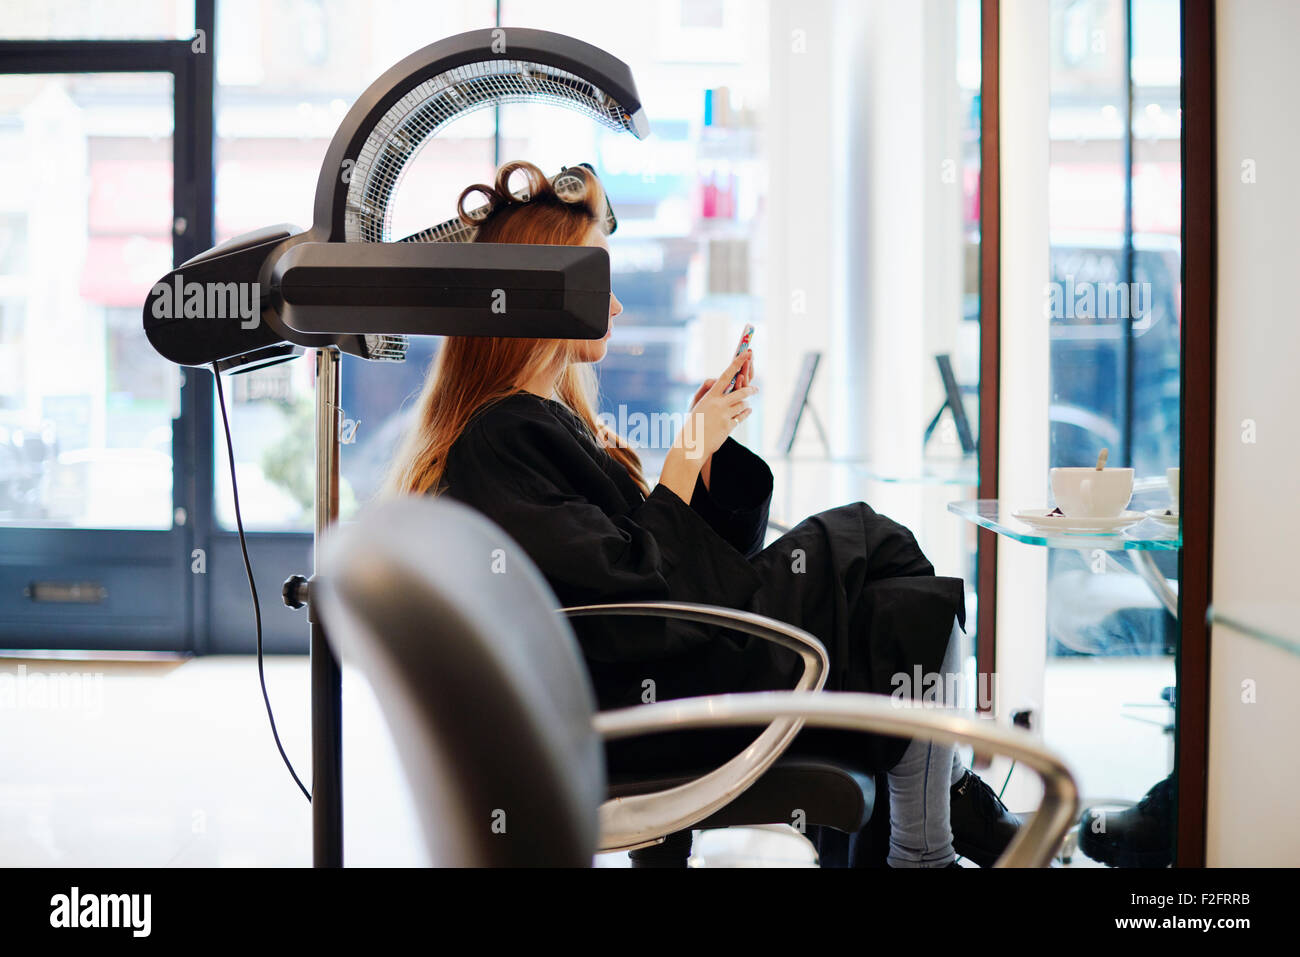 Woman sitting under dryer texting with cell phone in hair salon Stock Photo